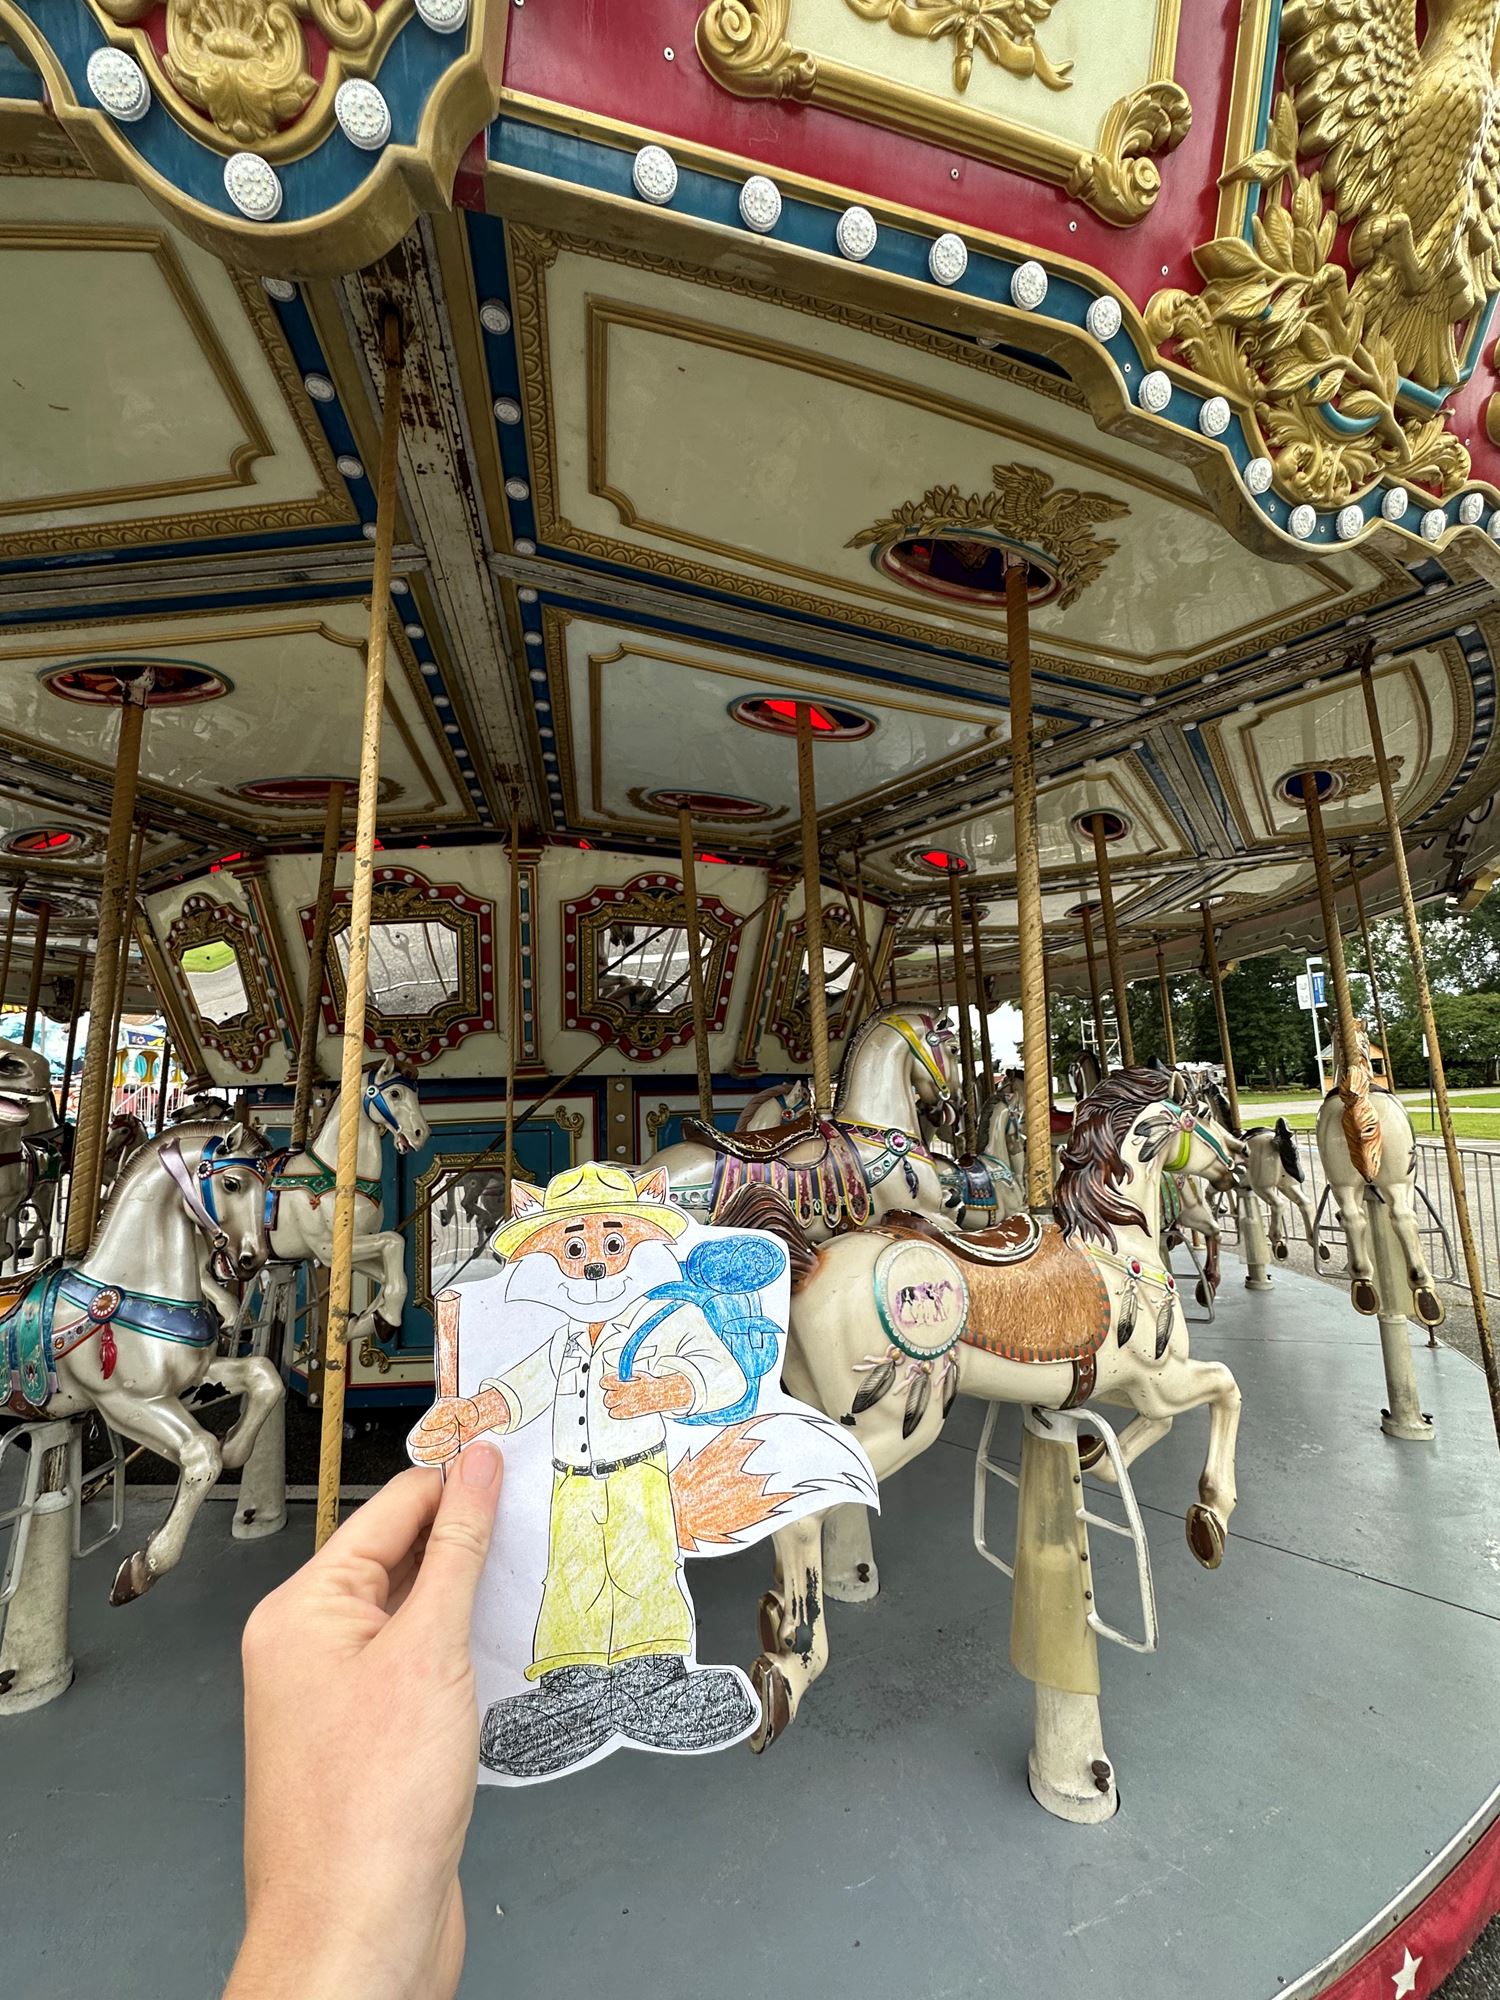 Explore the Fair with Flat Parker